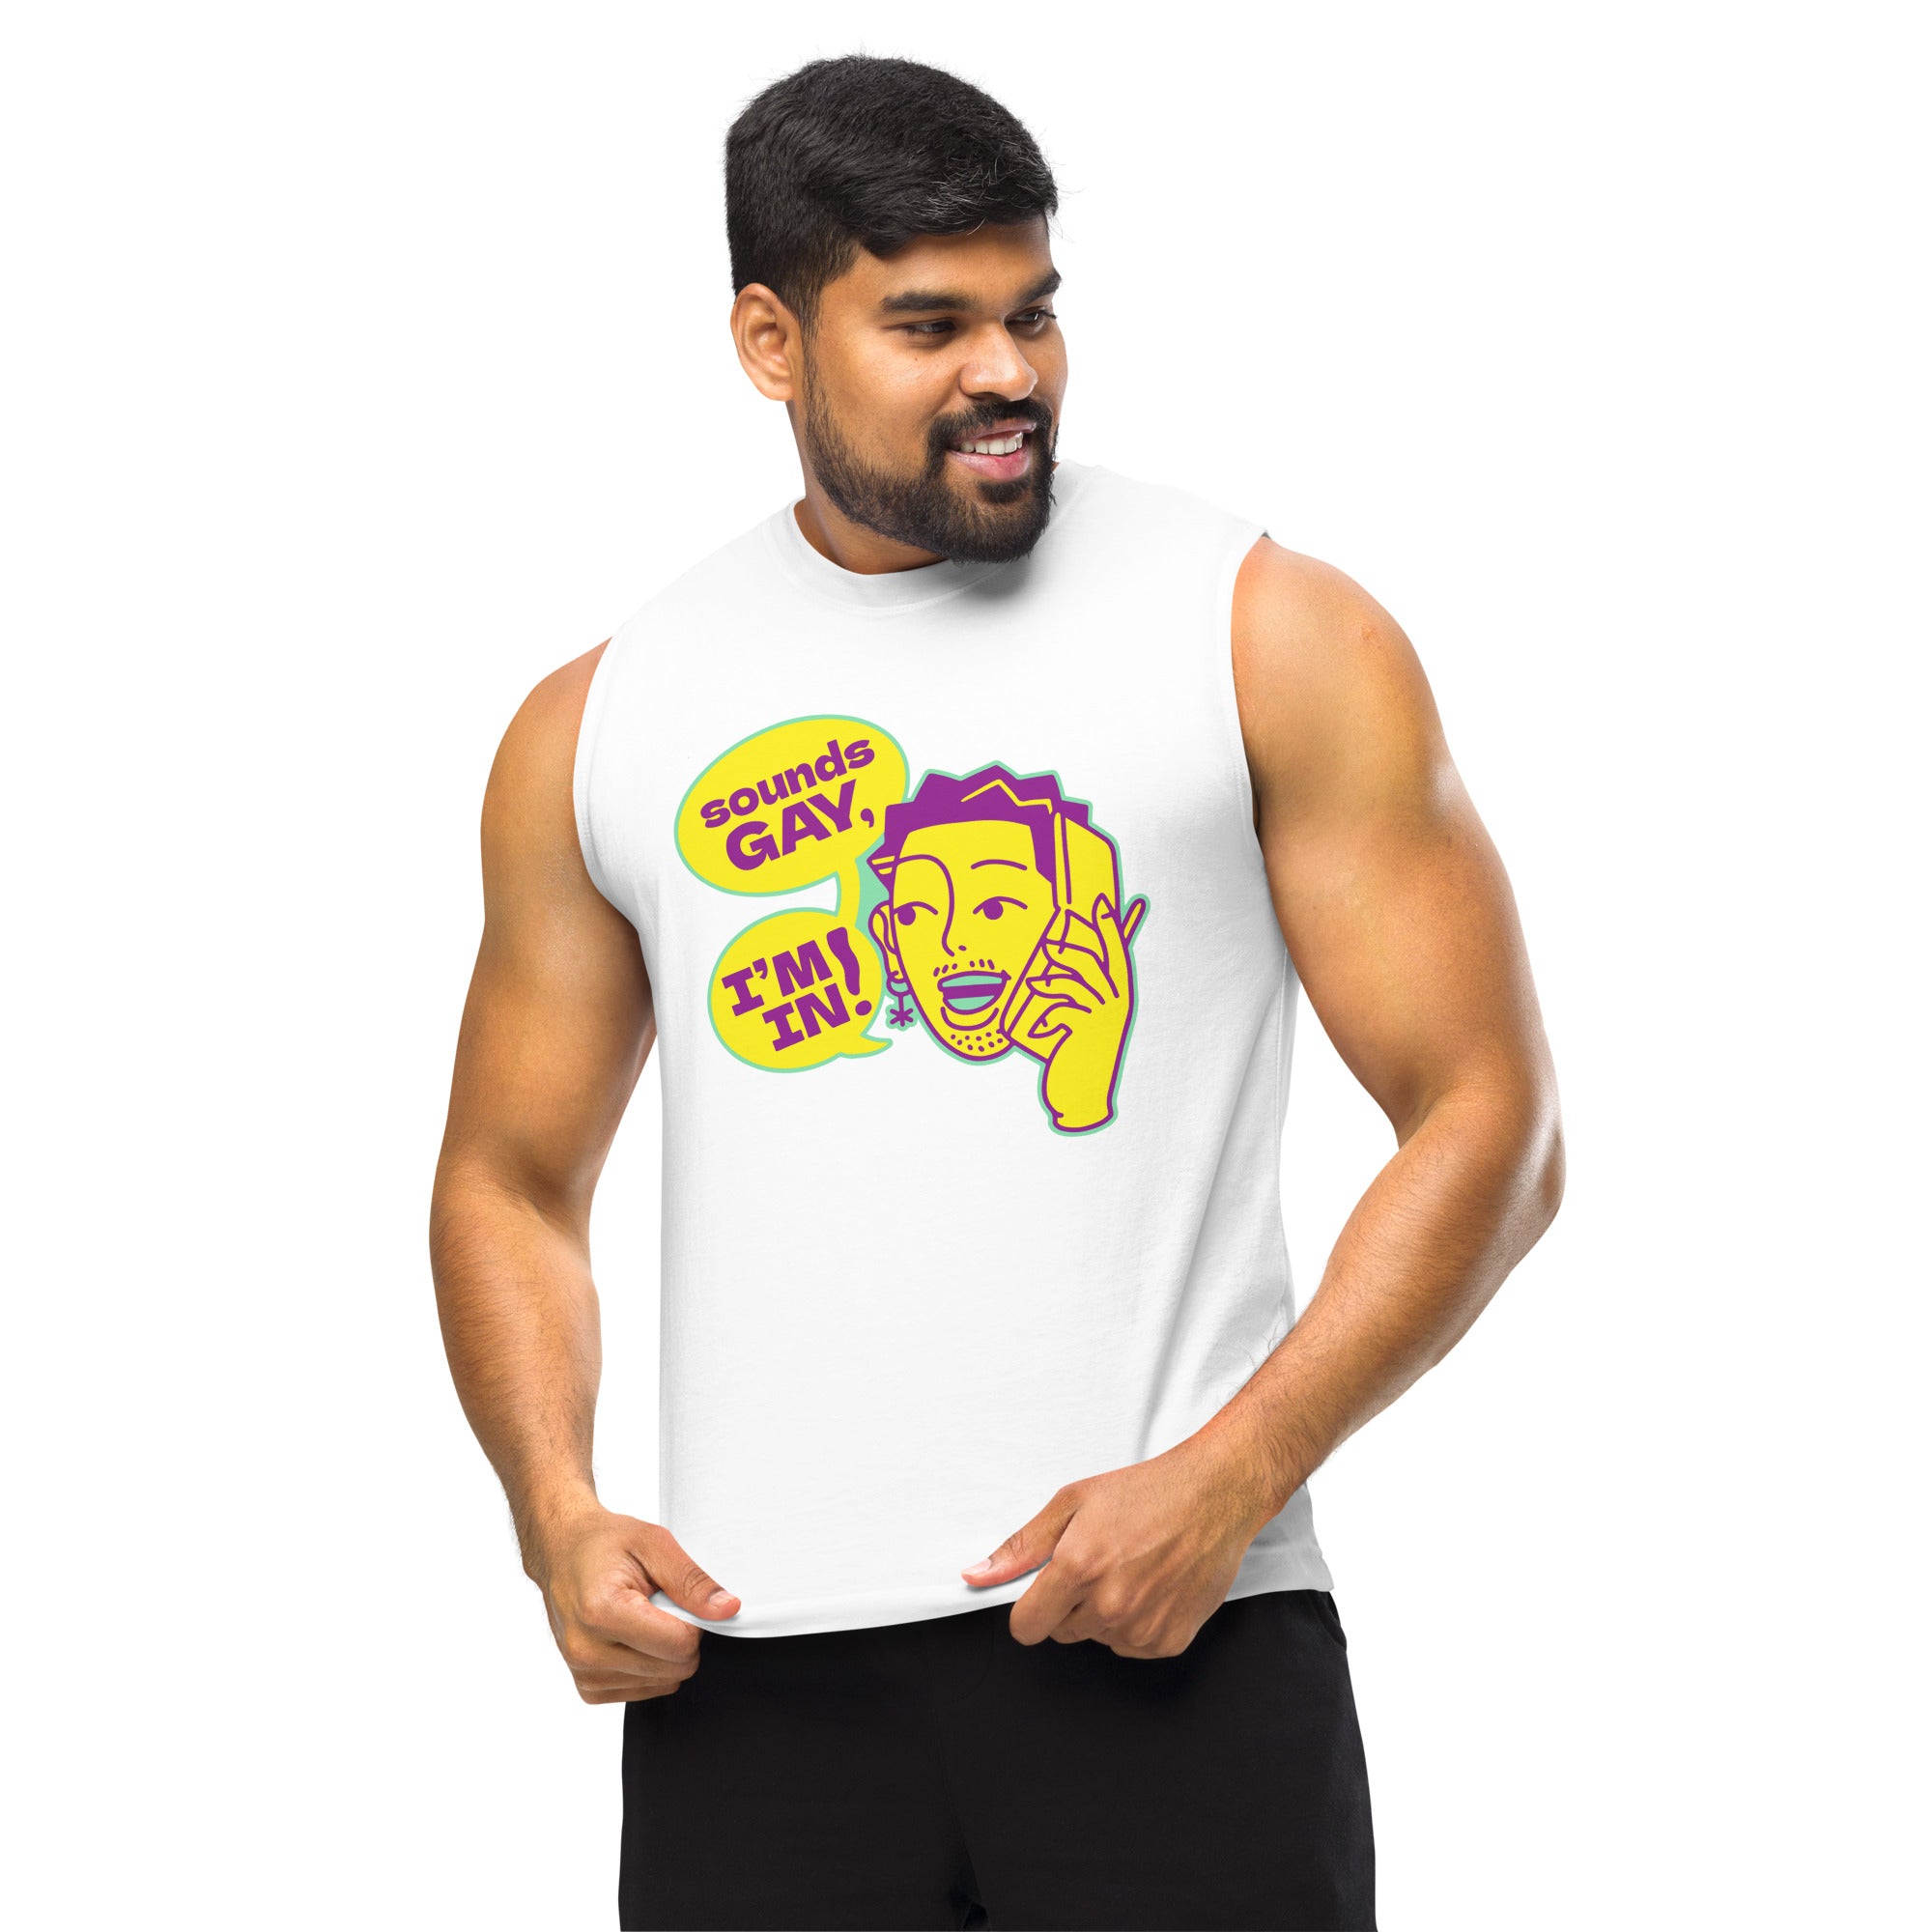 Sounds Gay - Muscle Shirt